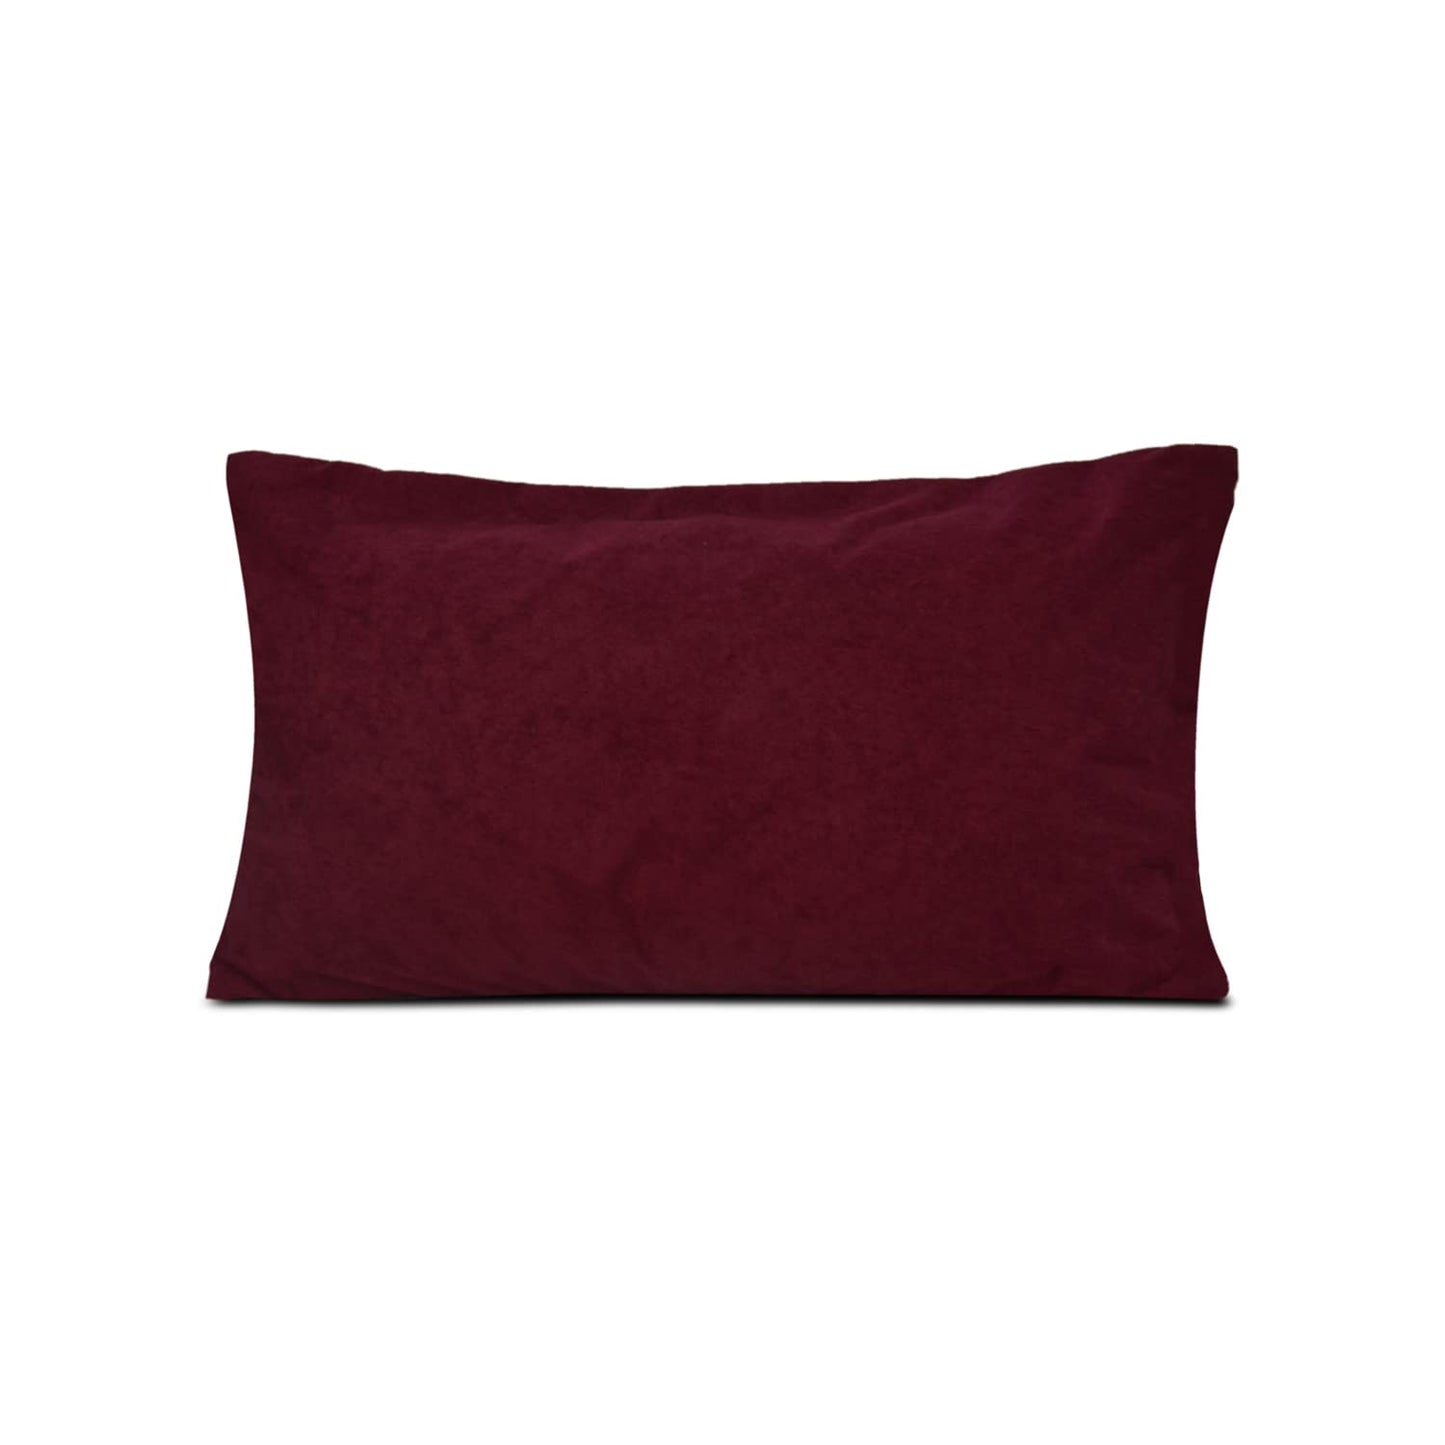 Fresh and Dust-Free Waterproof Pillow Protector in Rich Marron